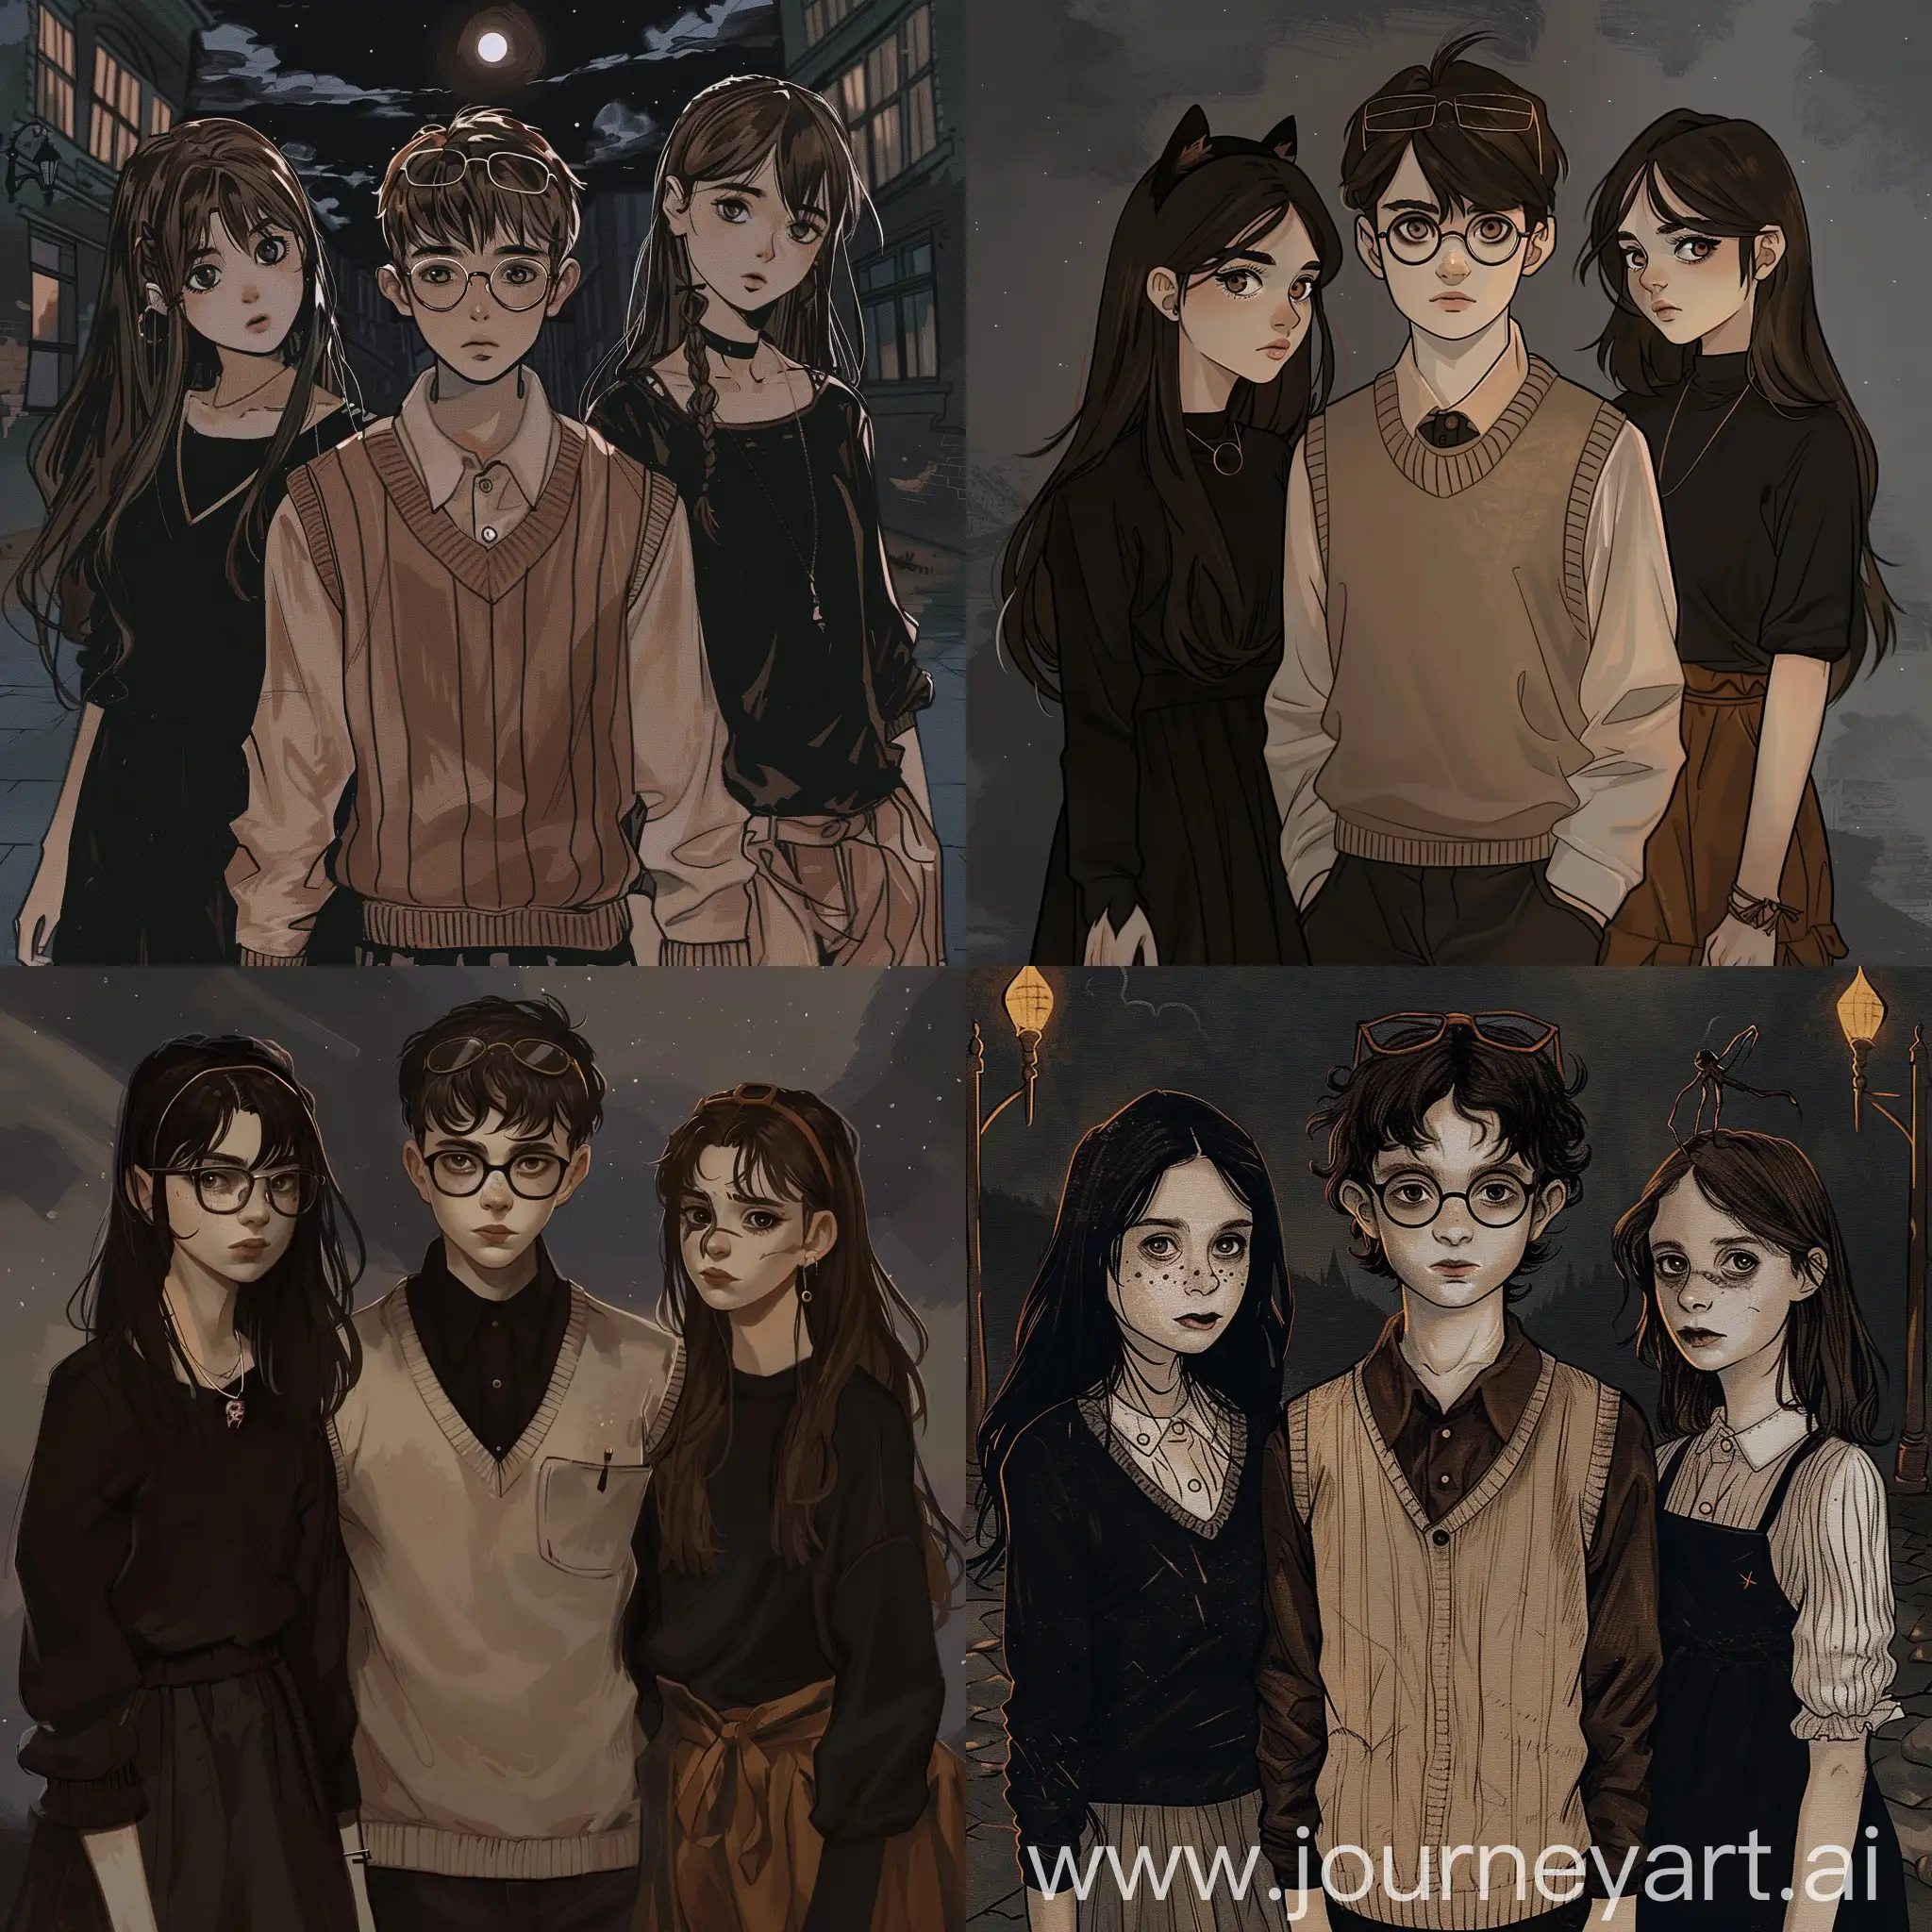 three teenagers, one boy in the middle with brown hair and glasses on his head with brown beige sweater vest, one girl with long dark hair and black outfit, and another girl with short brown hair with comfy clothes, drawing, night theme, dark theme, scary, horror